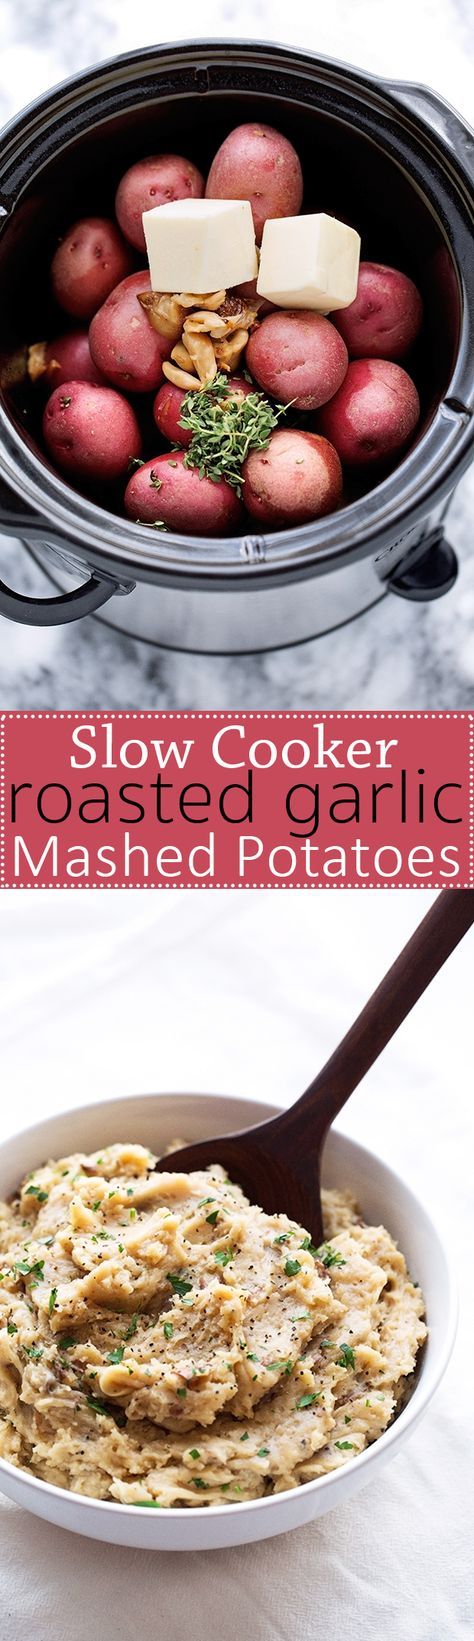 Roasted Garlic Mashed Potatoes – Learn how to make roasted garlic mashed potatoes